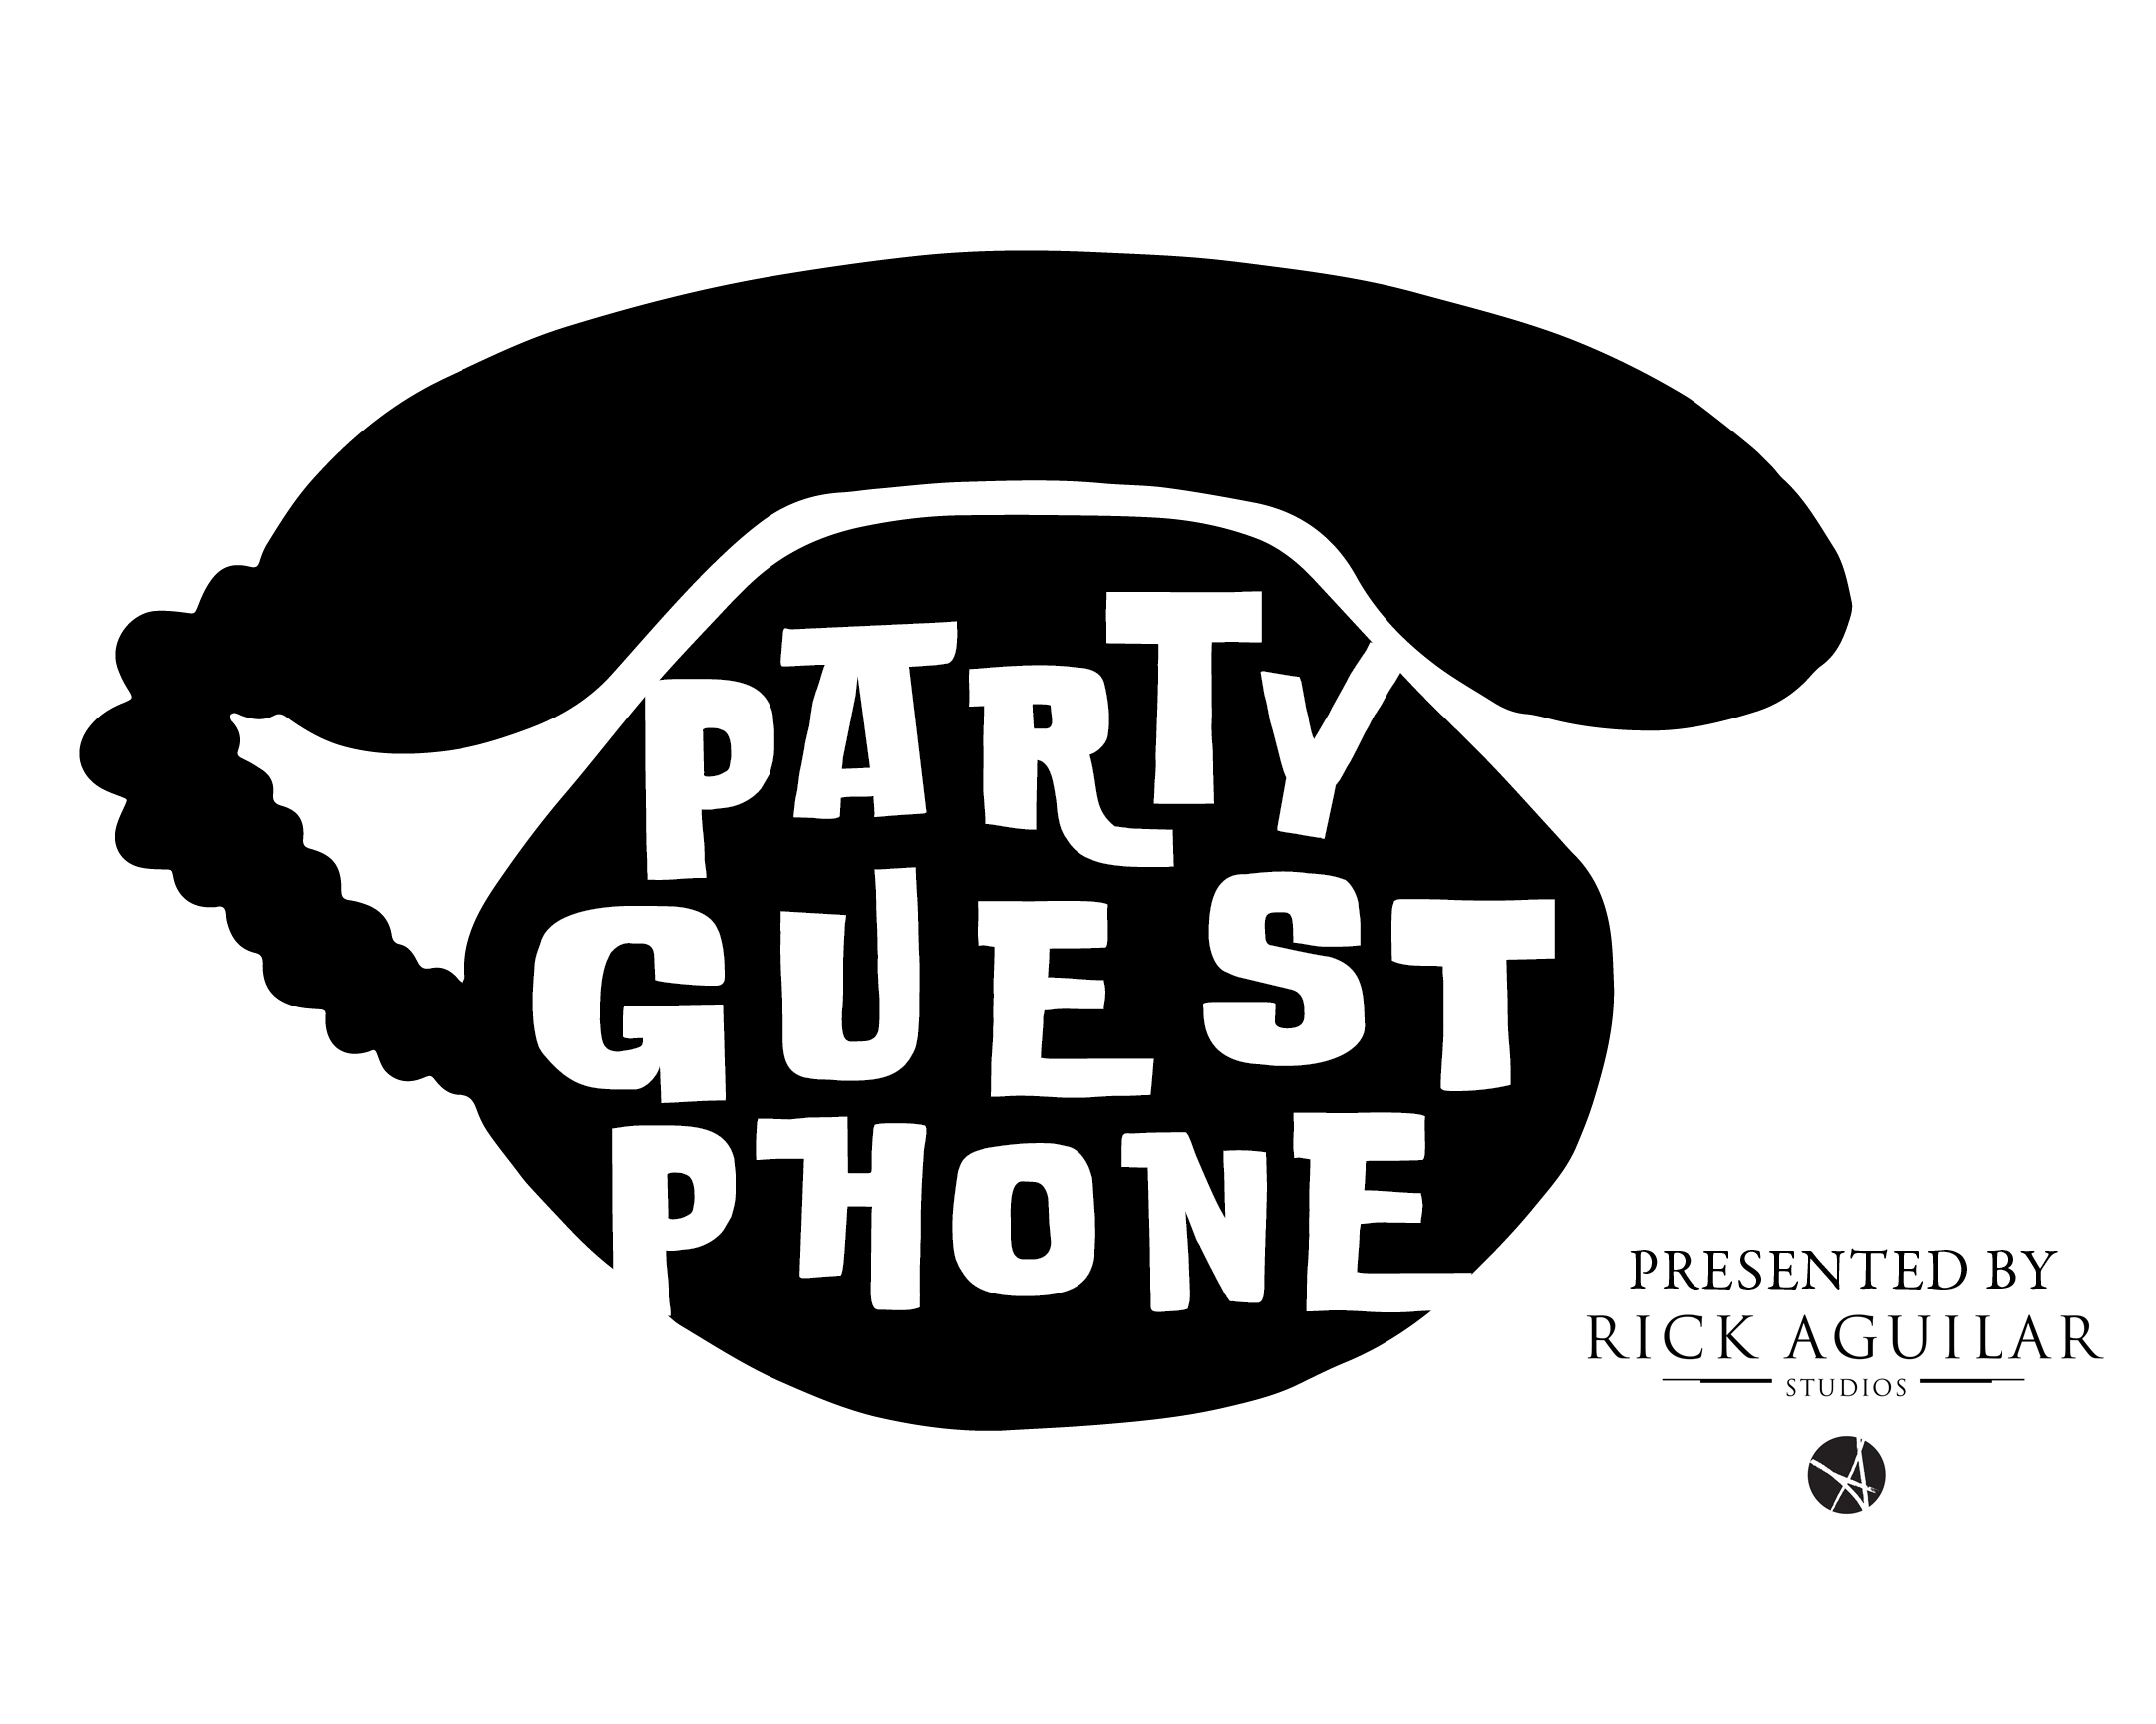 The Party Guest Phone is a new service by Rick Aguilar Studios